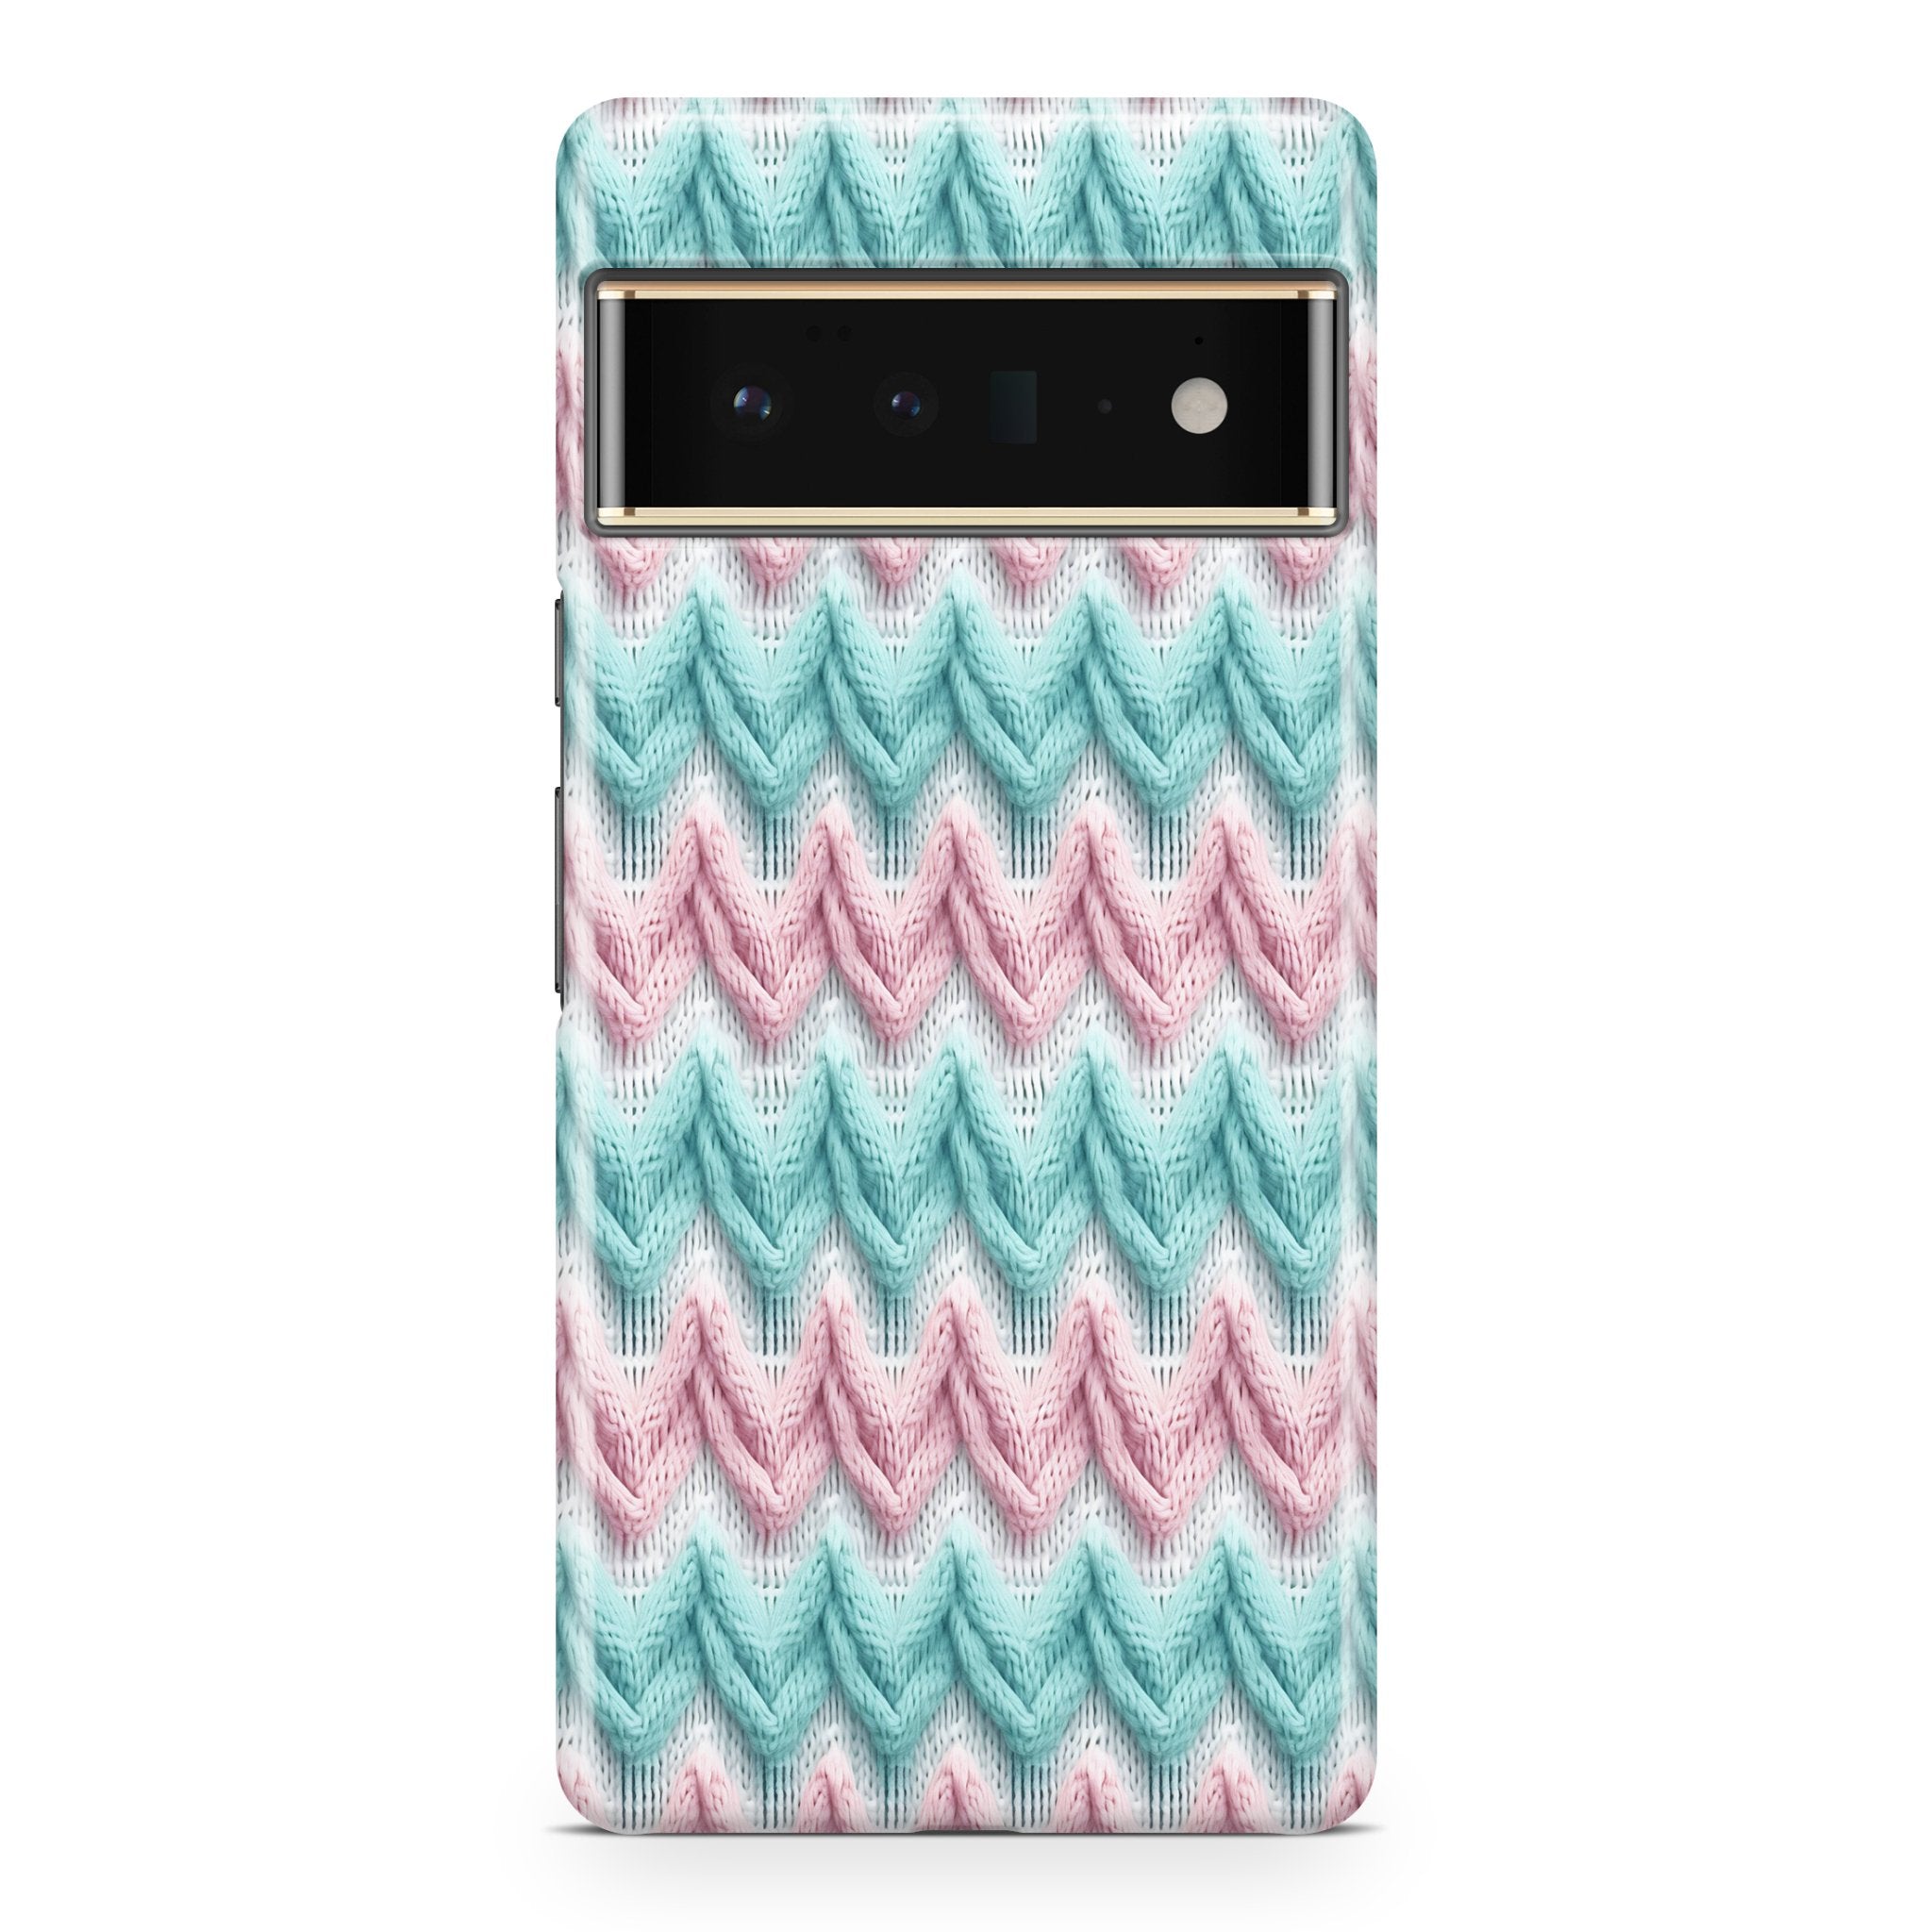 Dreamy Hues - Google phone case designs by CaseSwagger